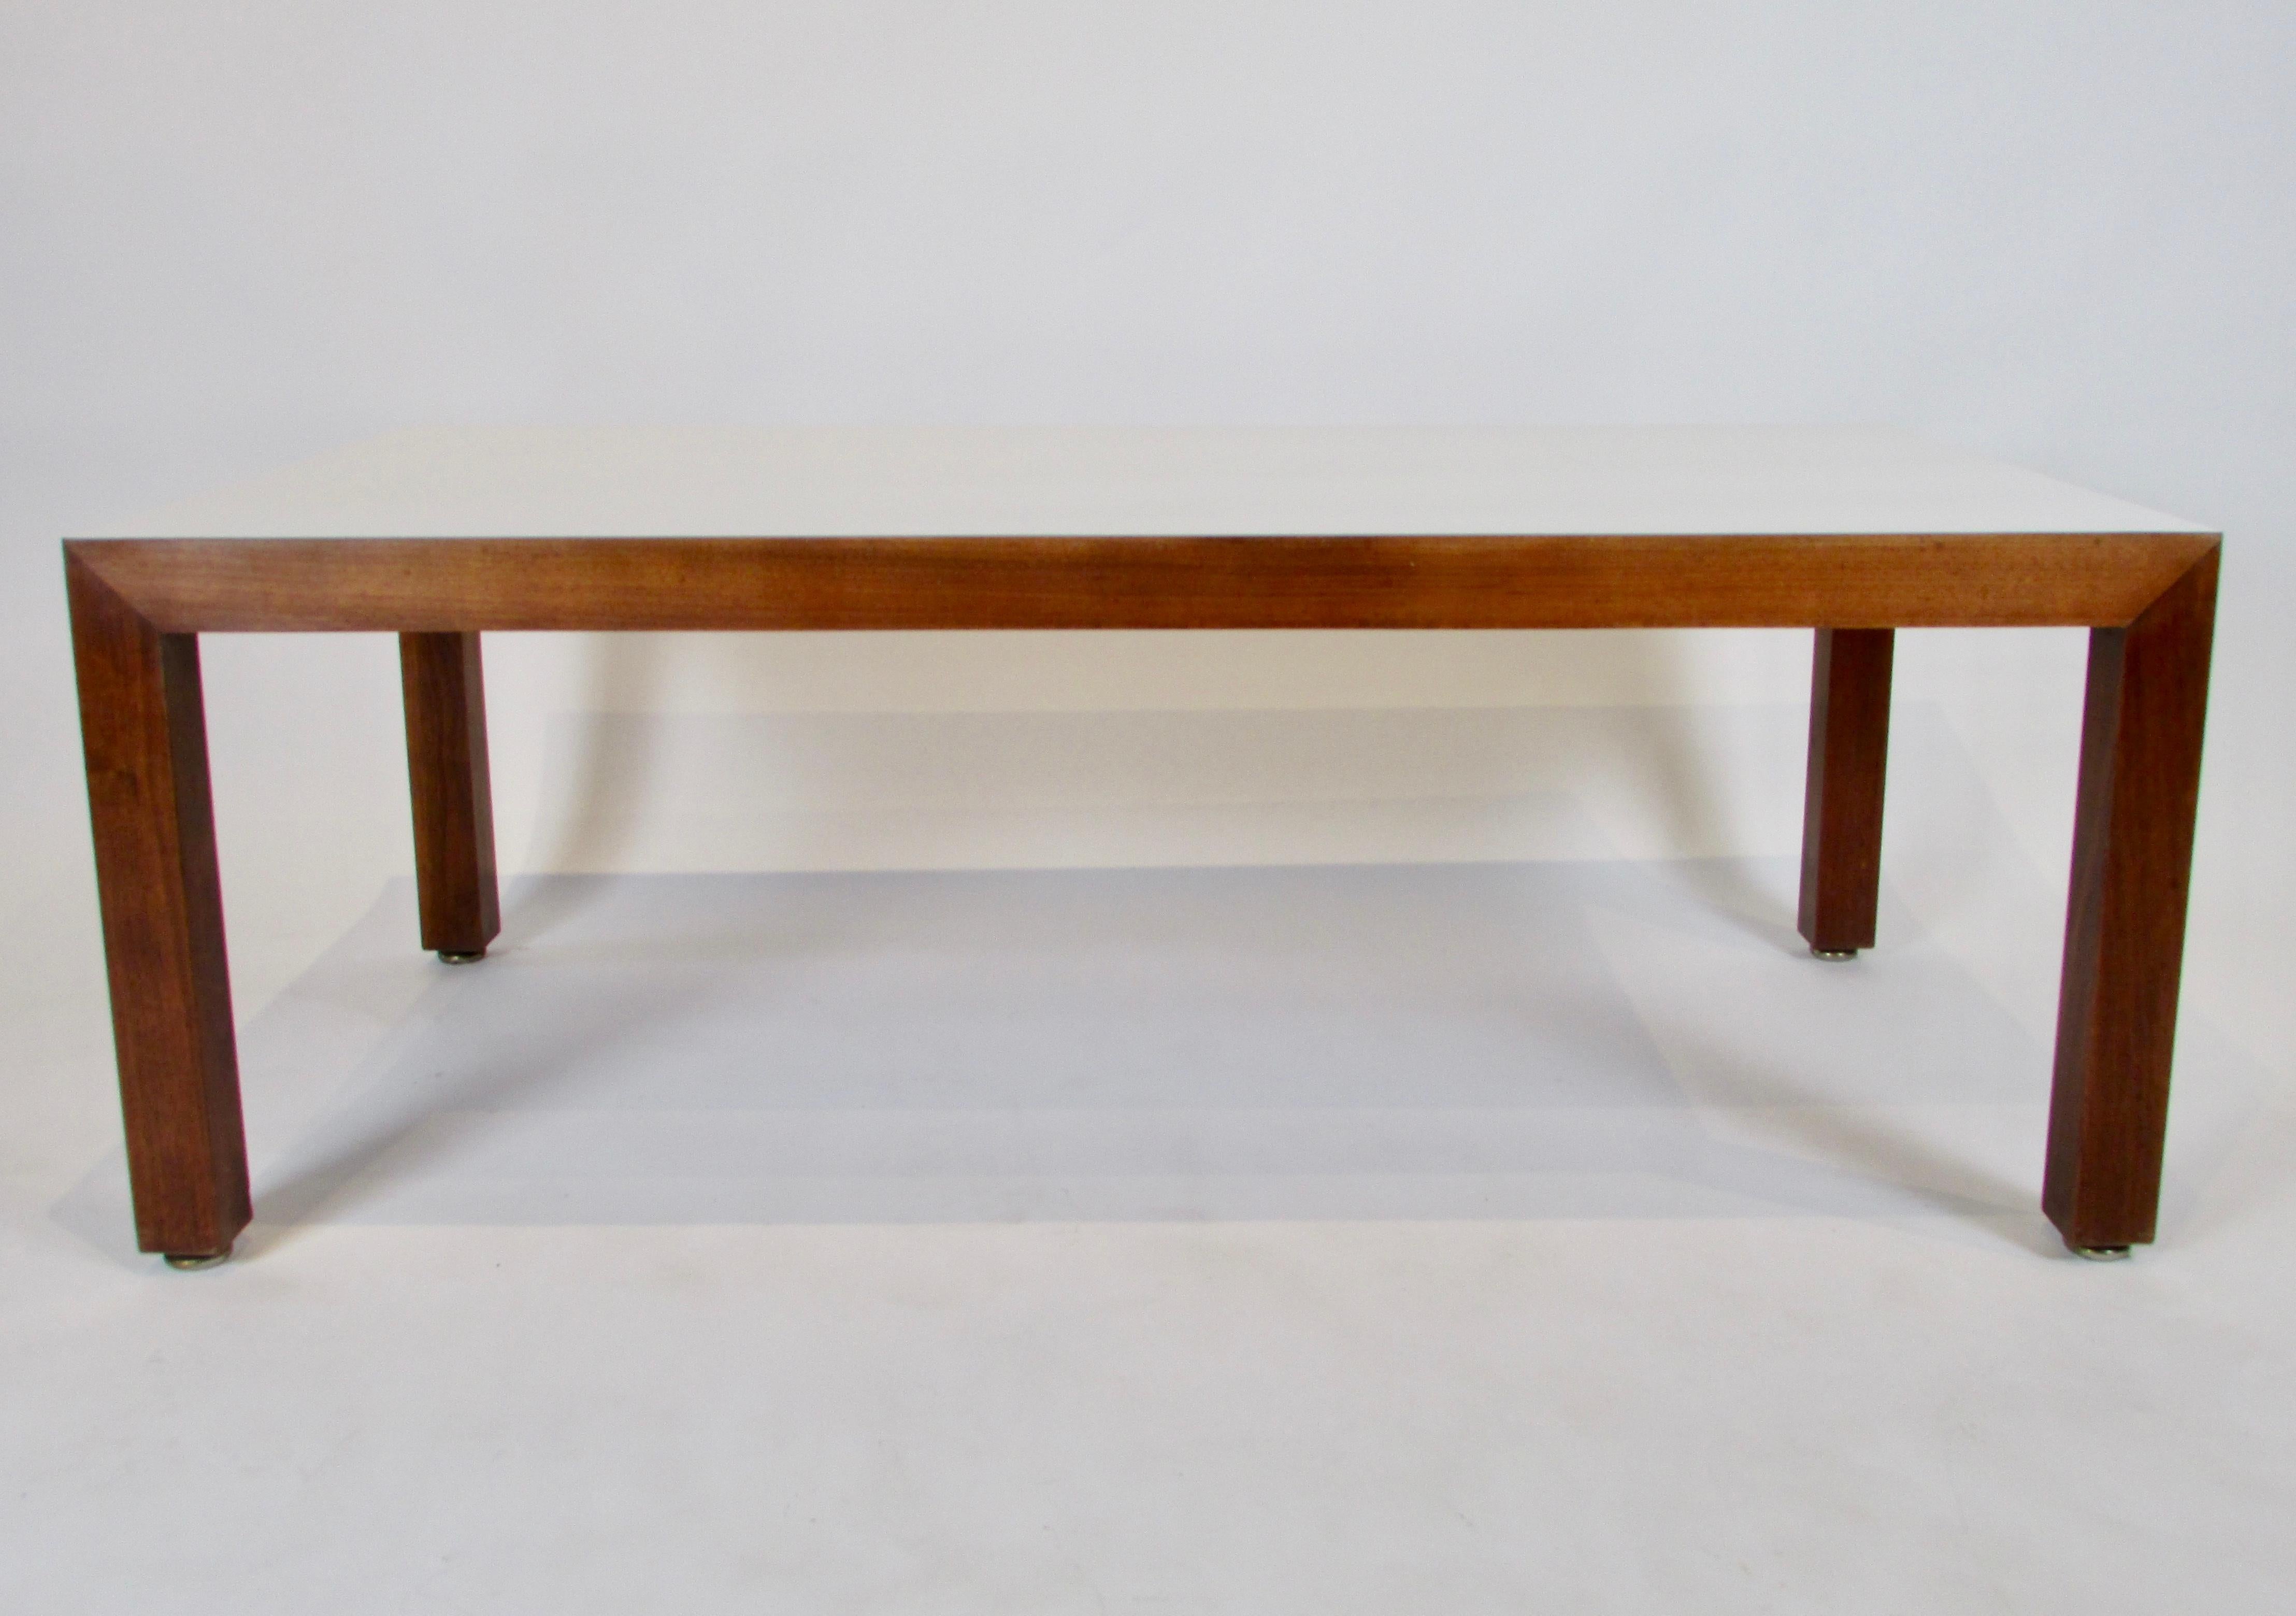 This 1960s era clean-lined rectangular shaped coffee table offers mid-century style with plenty of durable surface area. It is minimal and functional and doesn't shout at you and that is why it's fantastic. Good condition, wear is consistent with